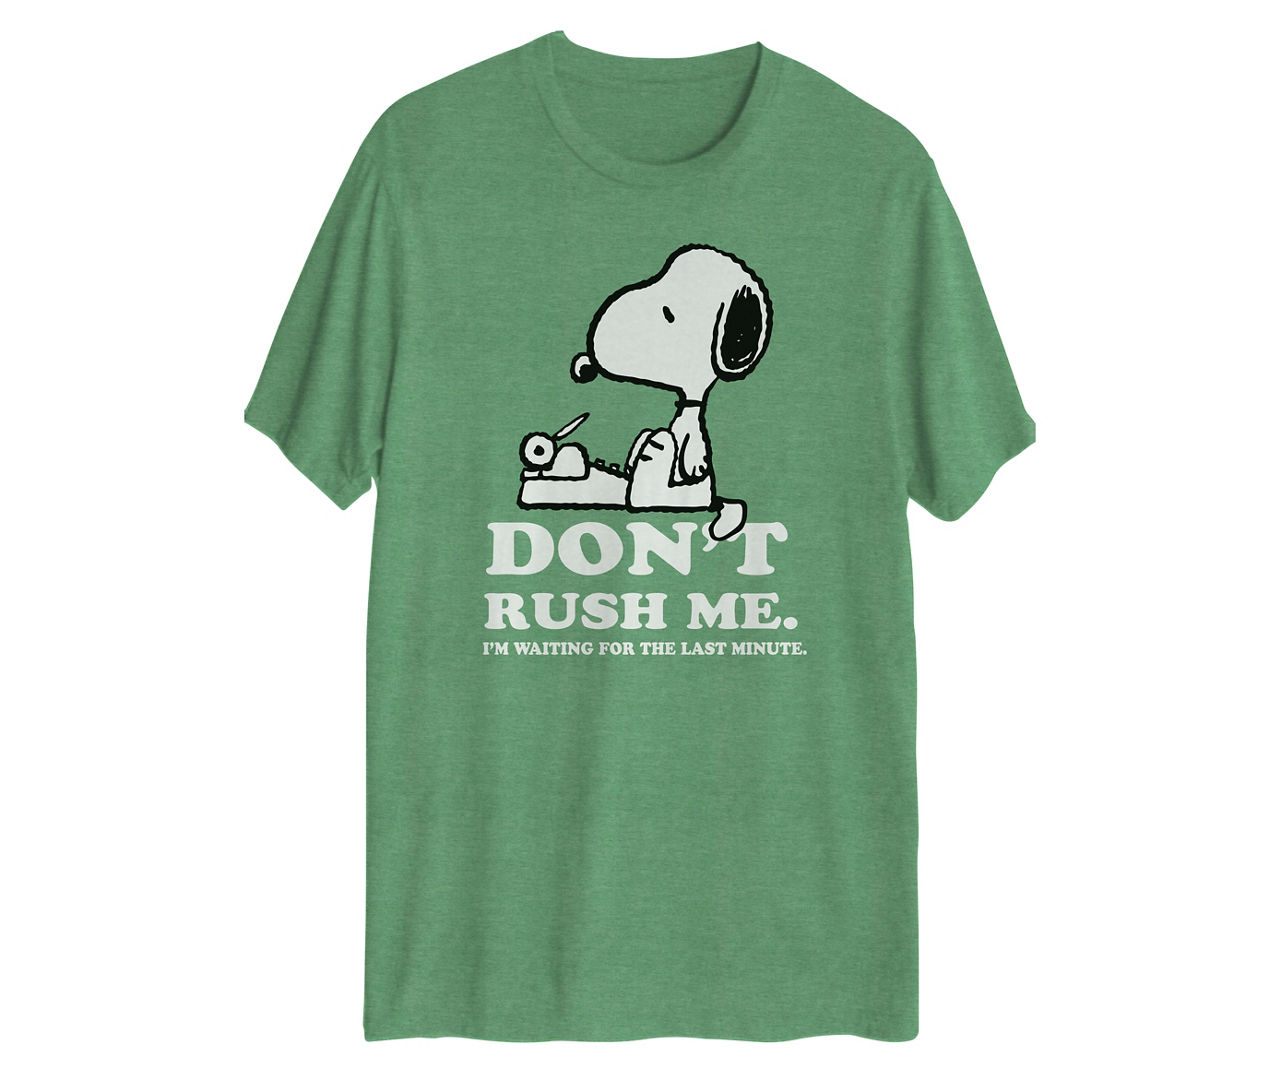 Peanuts Men's Size L "Don't Rush Me" Green Heather Snoopy Graphic Tee